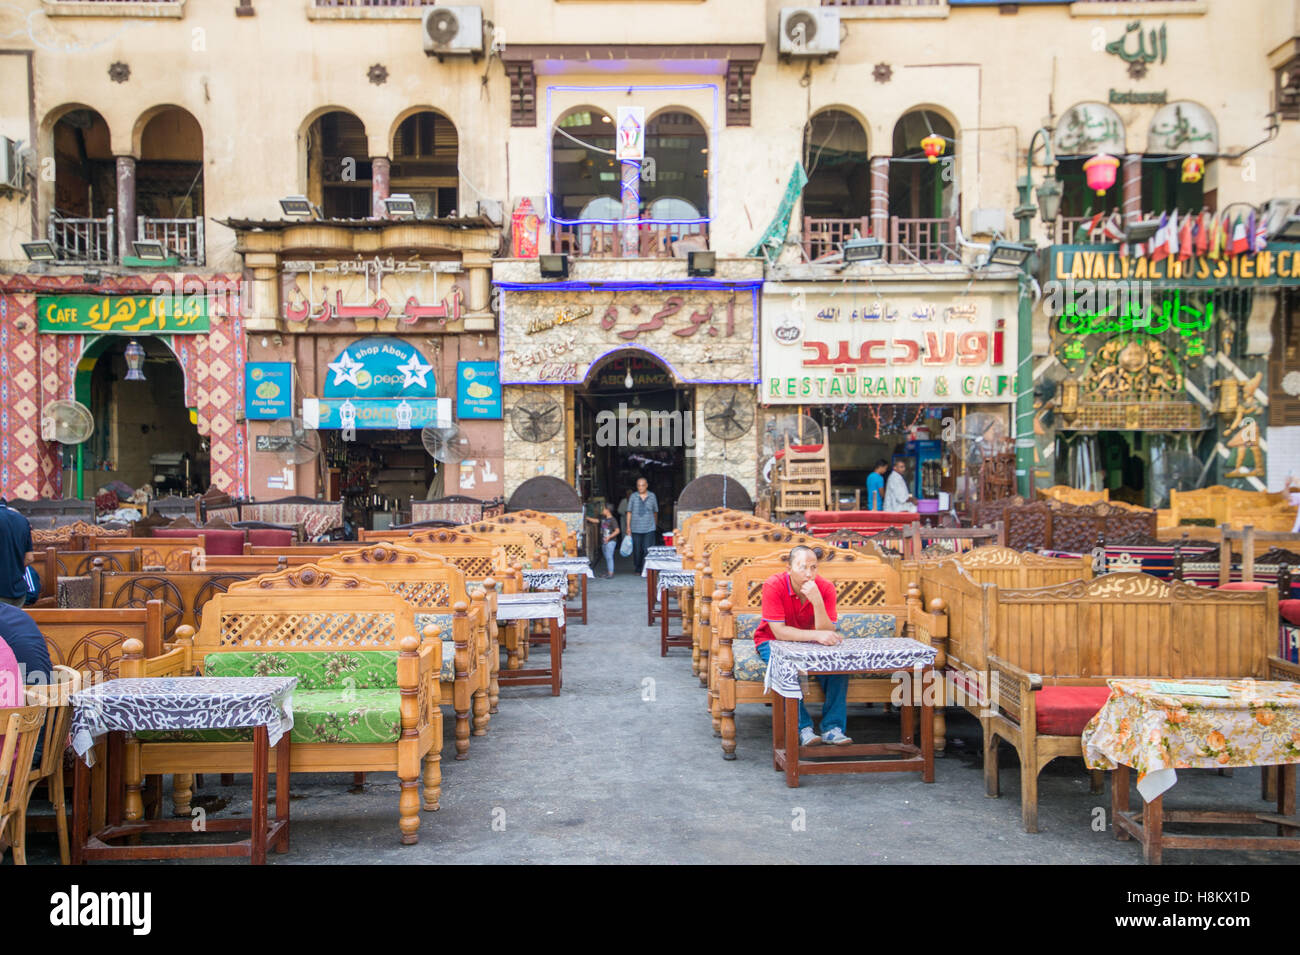 Cairo, Egypt. Man sitting alone in a sitting area surrounded by different shop signs in the outdoor bazaar/ flea market Khan el- Stock Photo